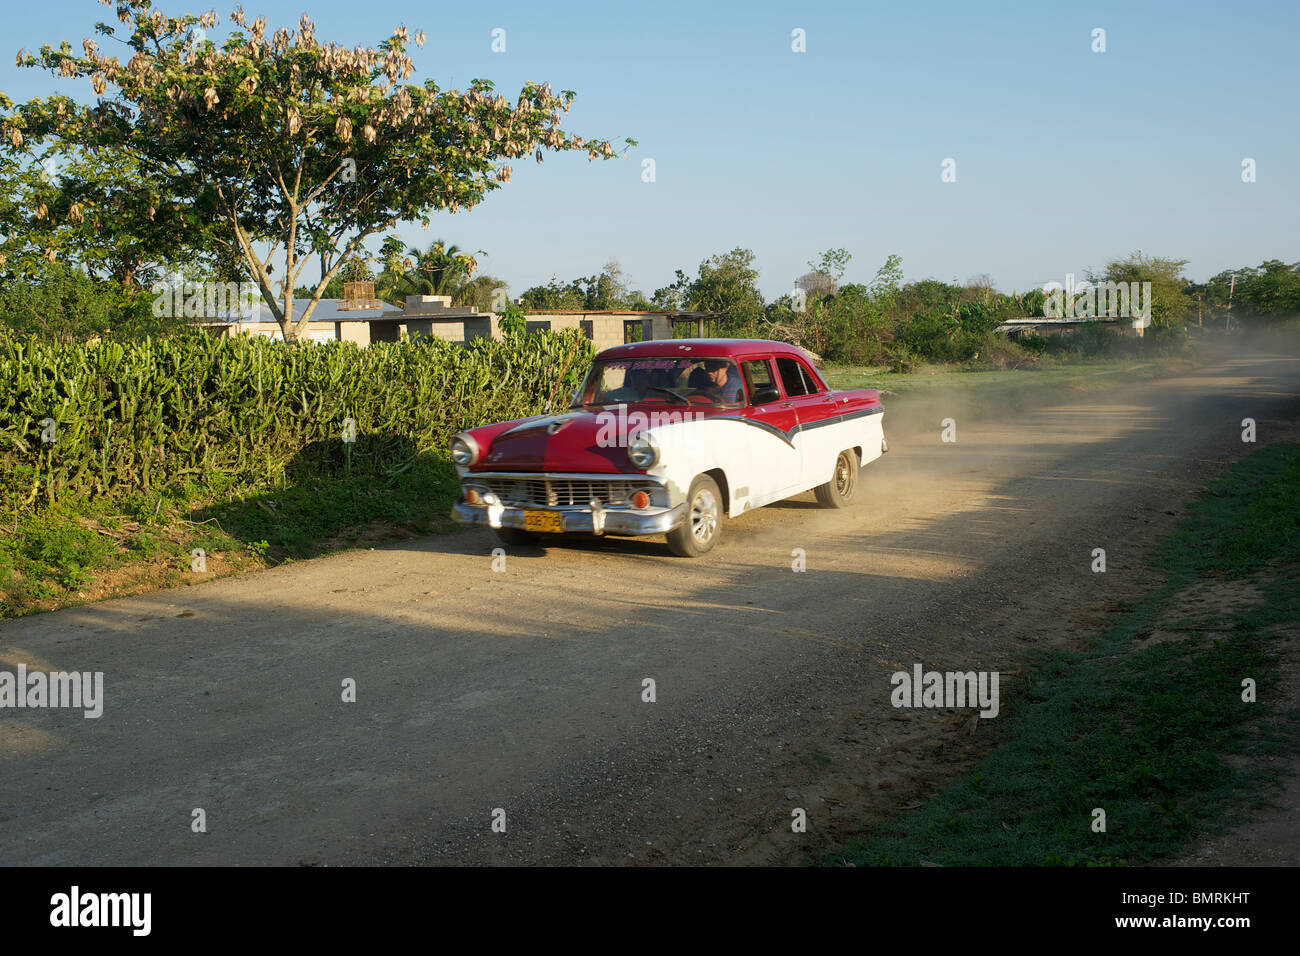 Classic car on a dirt road in Cuba Stock Photo